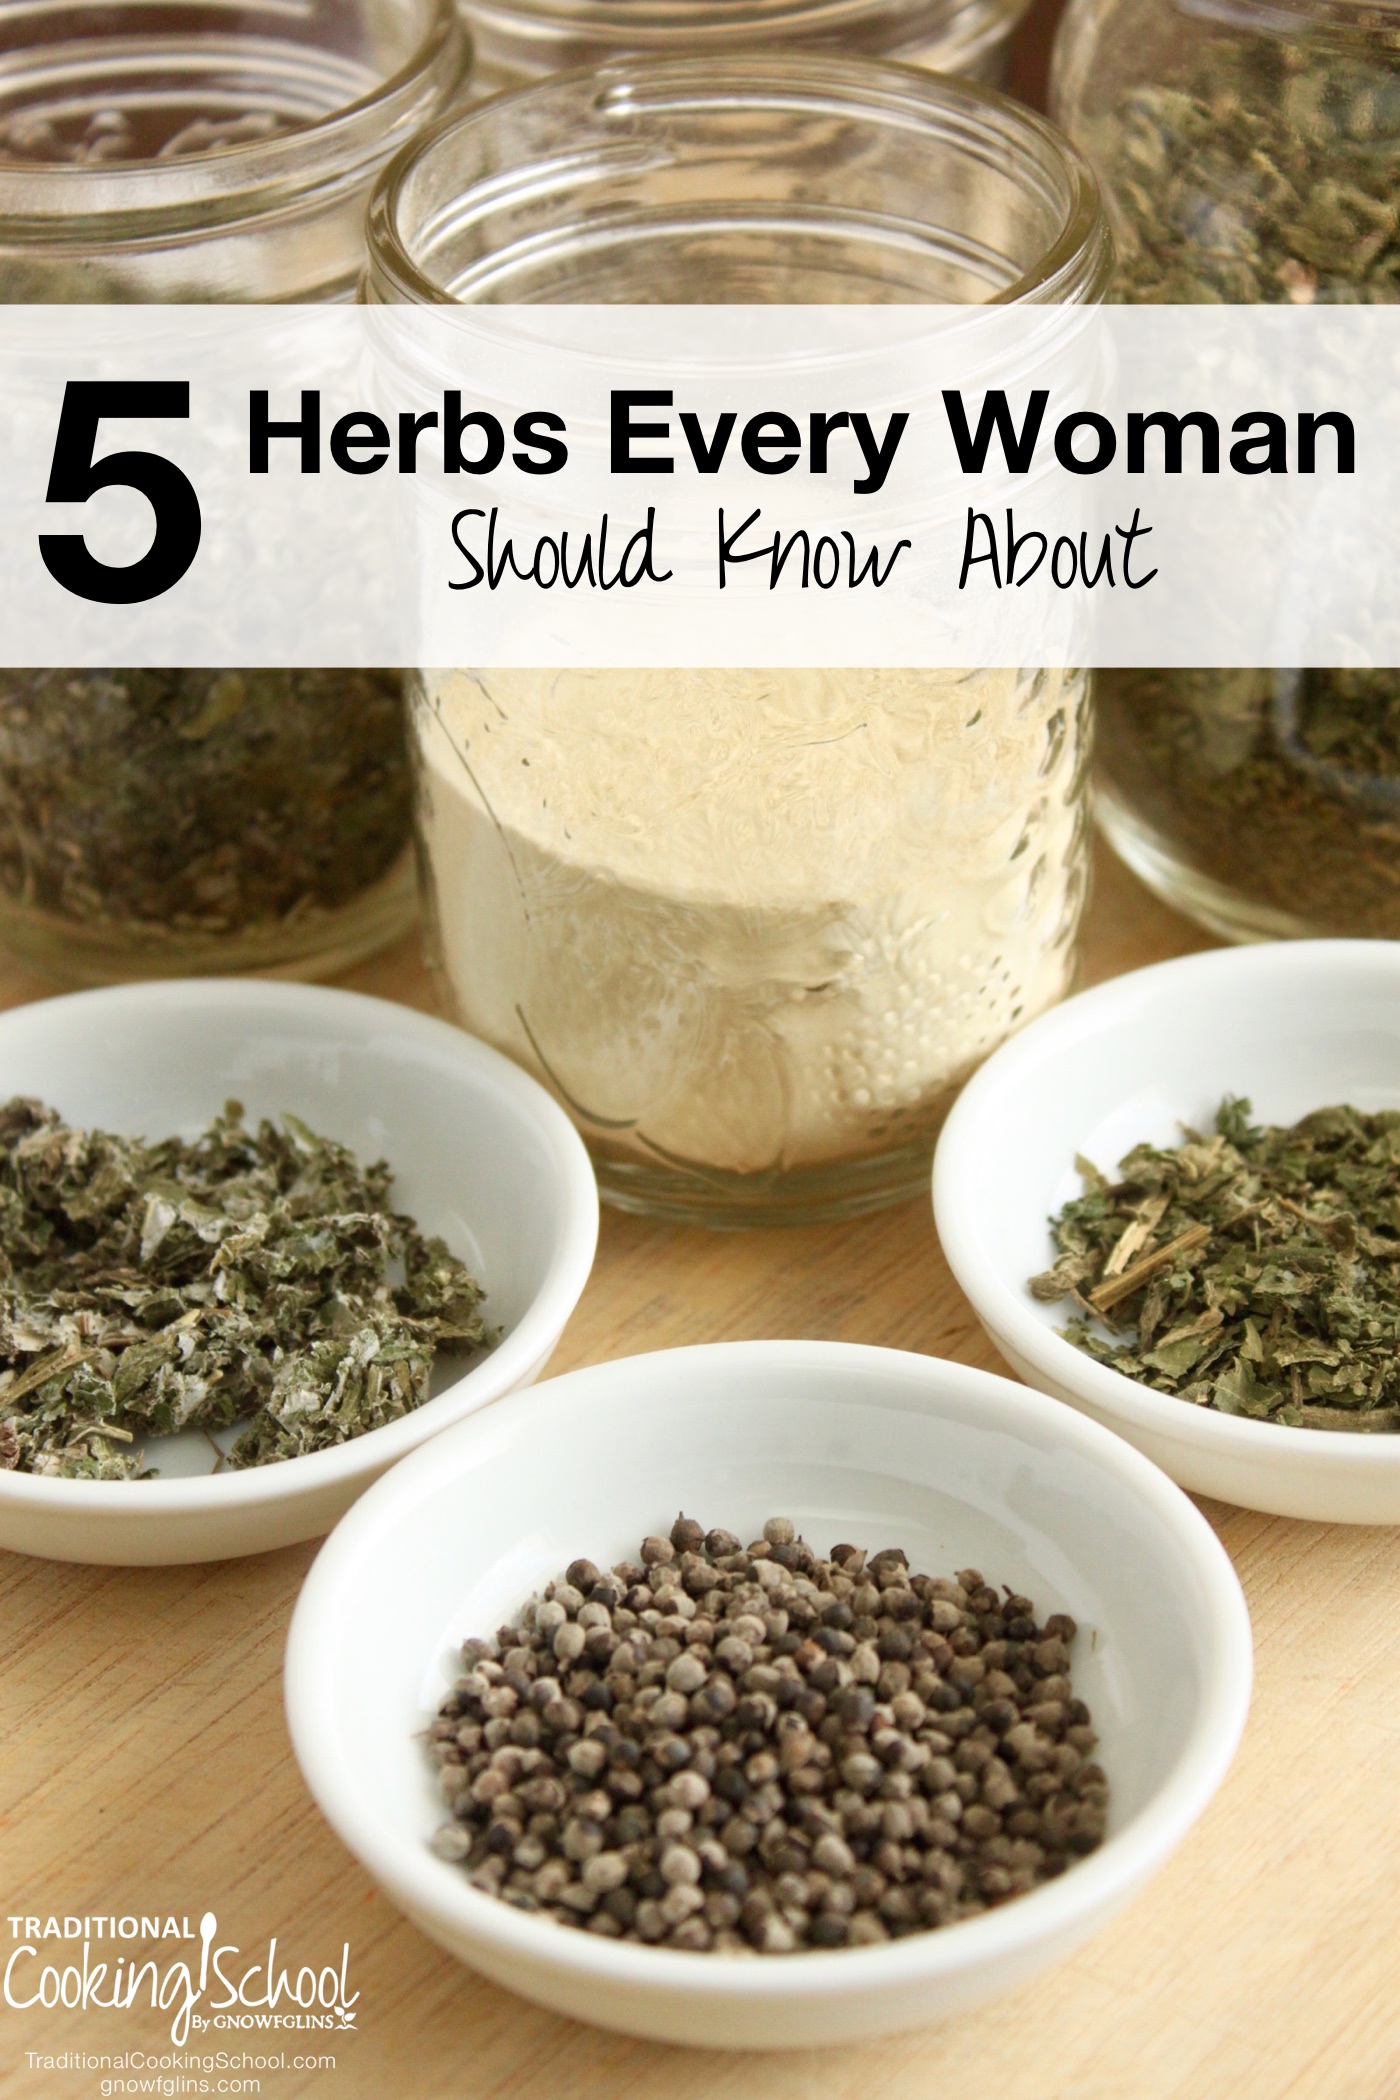 5 Herbs Every Woman Should Know About | Are you looking for freedom from PMS? Do you want to ease the effects of stress -- and age gracefully? How about something that will tone your skin and make you glow from the inside out? Here are 5 herbs for women that will do just that and more! | TraditionalCookingSchool.com